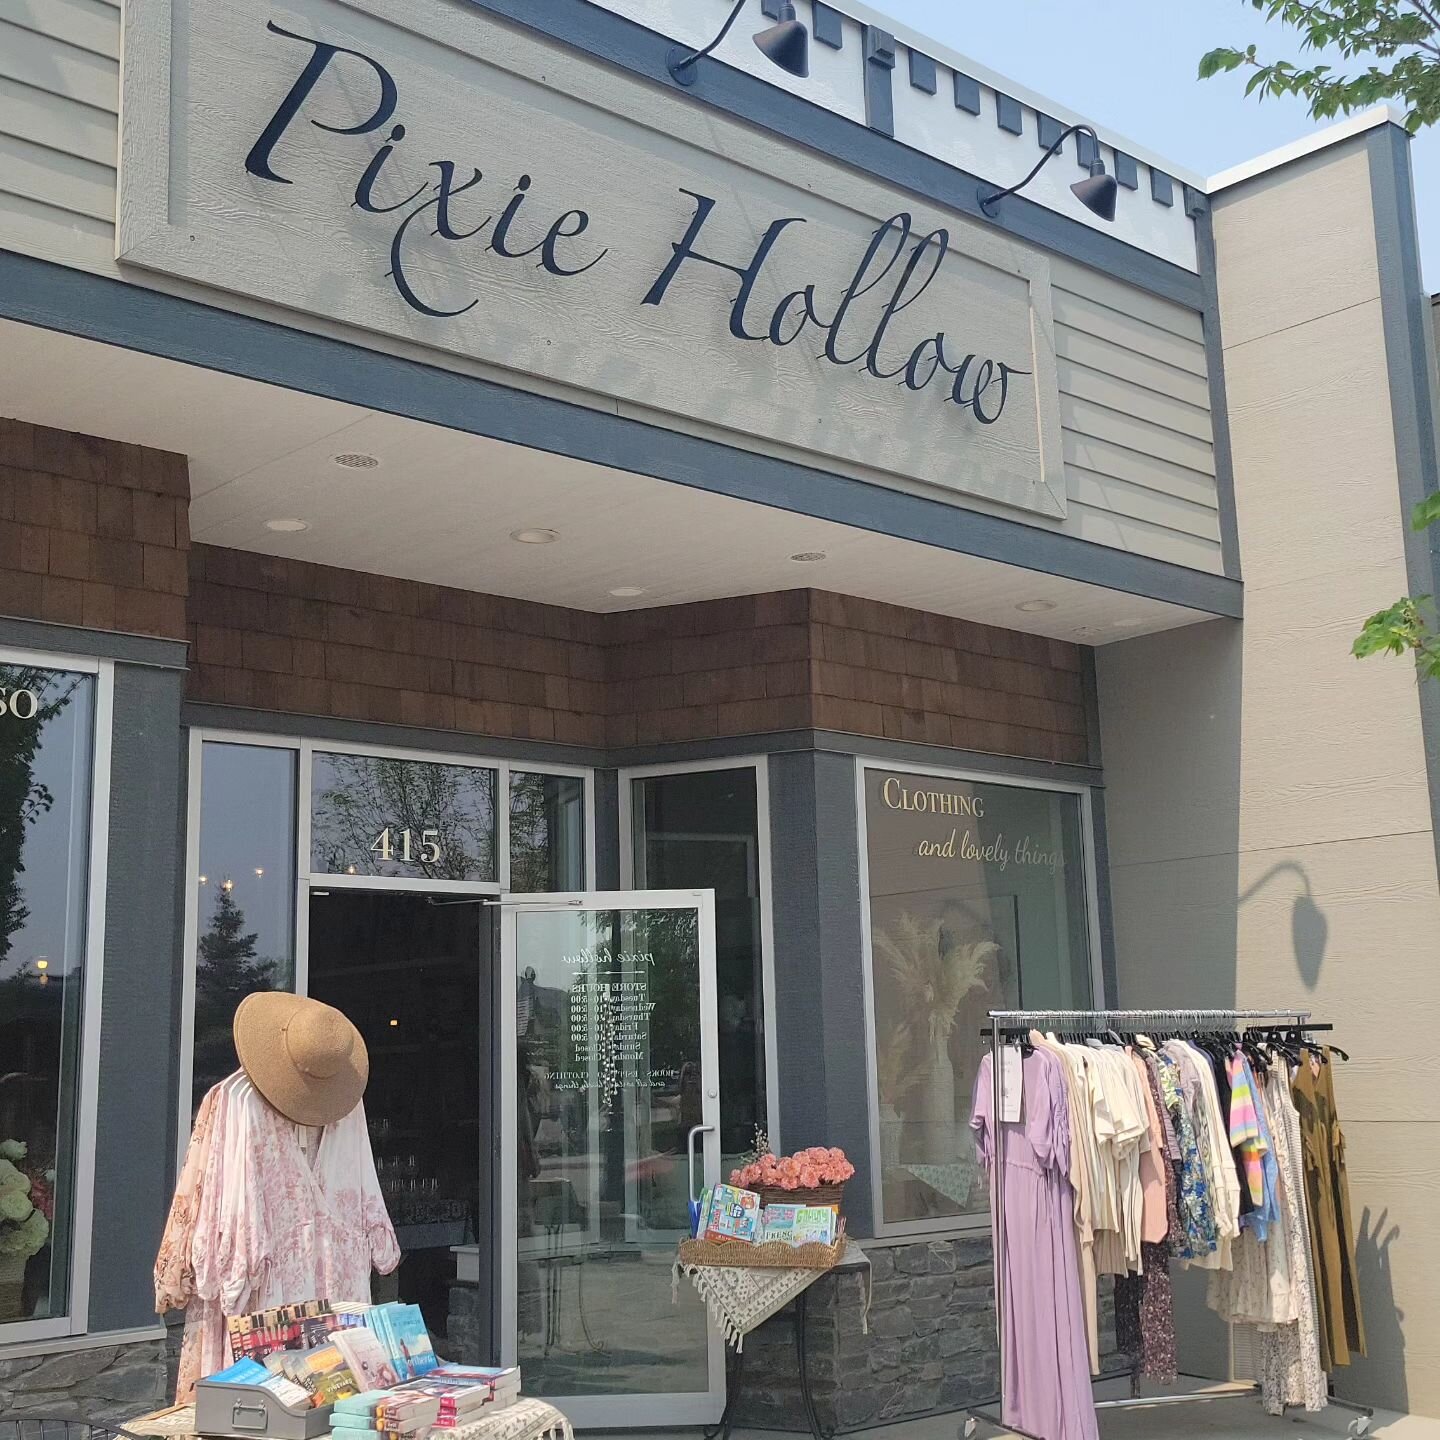 A collection of pretty little things inside and on the street at @pixiehollowbookshop 

Enjoy the day Chamber Members!

#HighRiver #littlebritchesparade2023